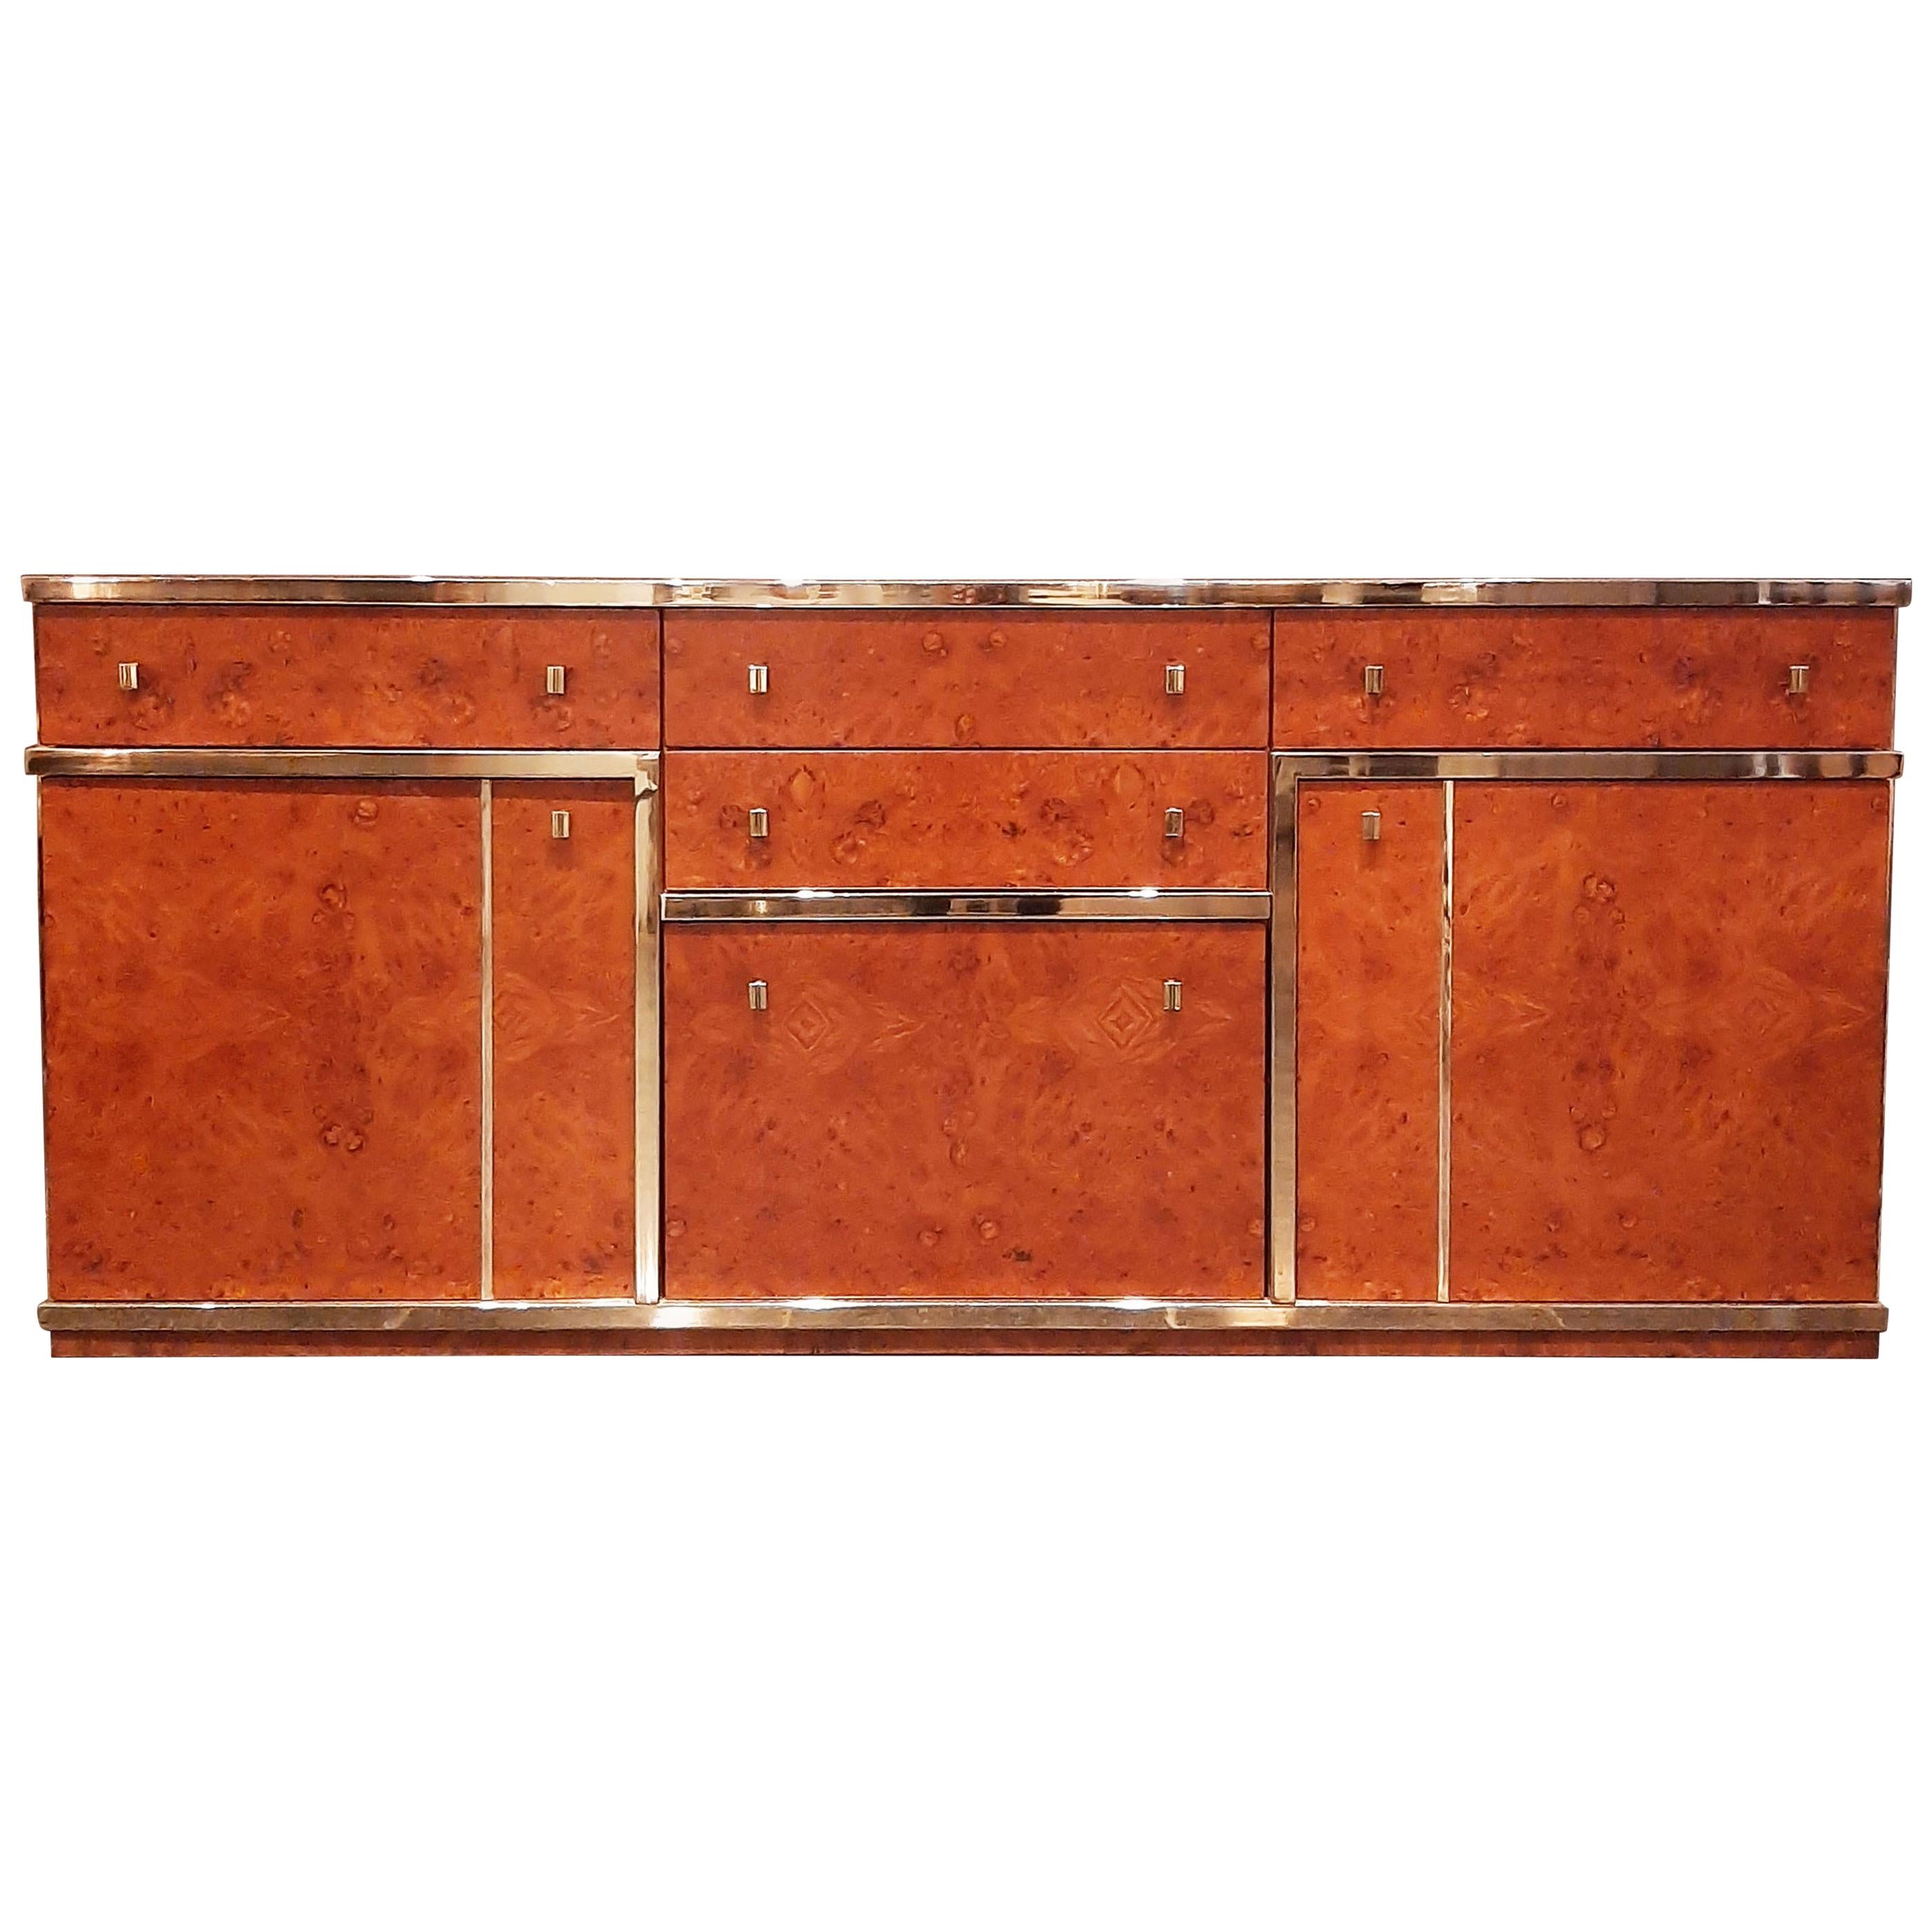 Midcentury Willy Rizzo Burl Wood and Chrome Credenza, Italy, 1970s